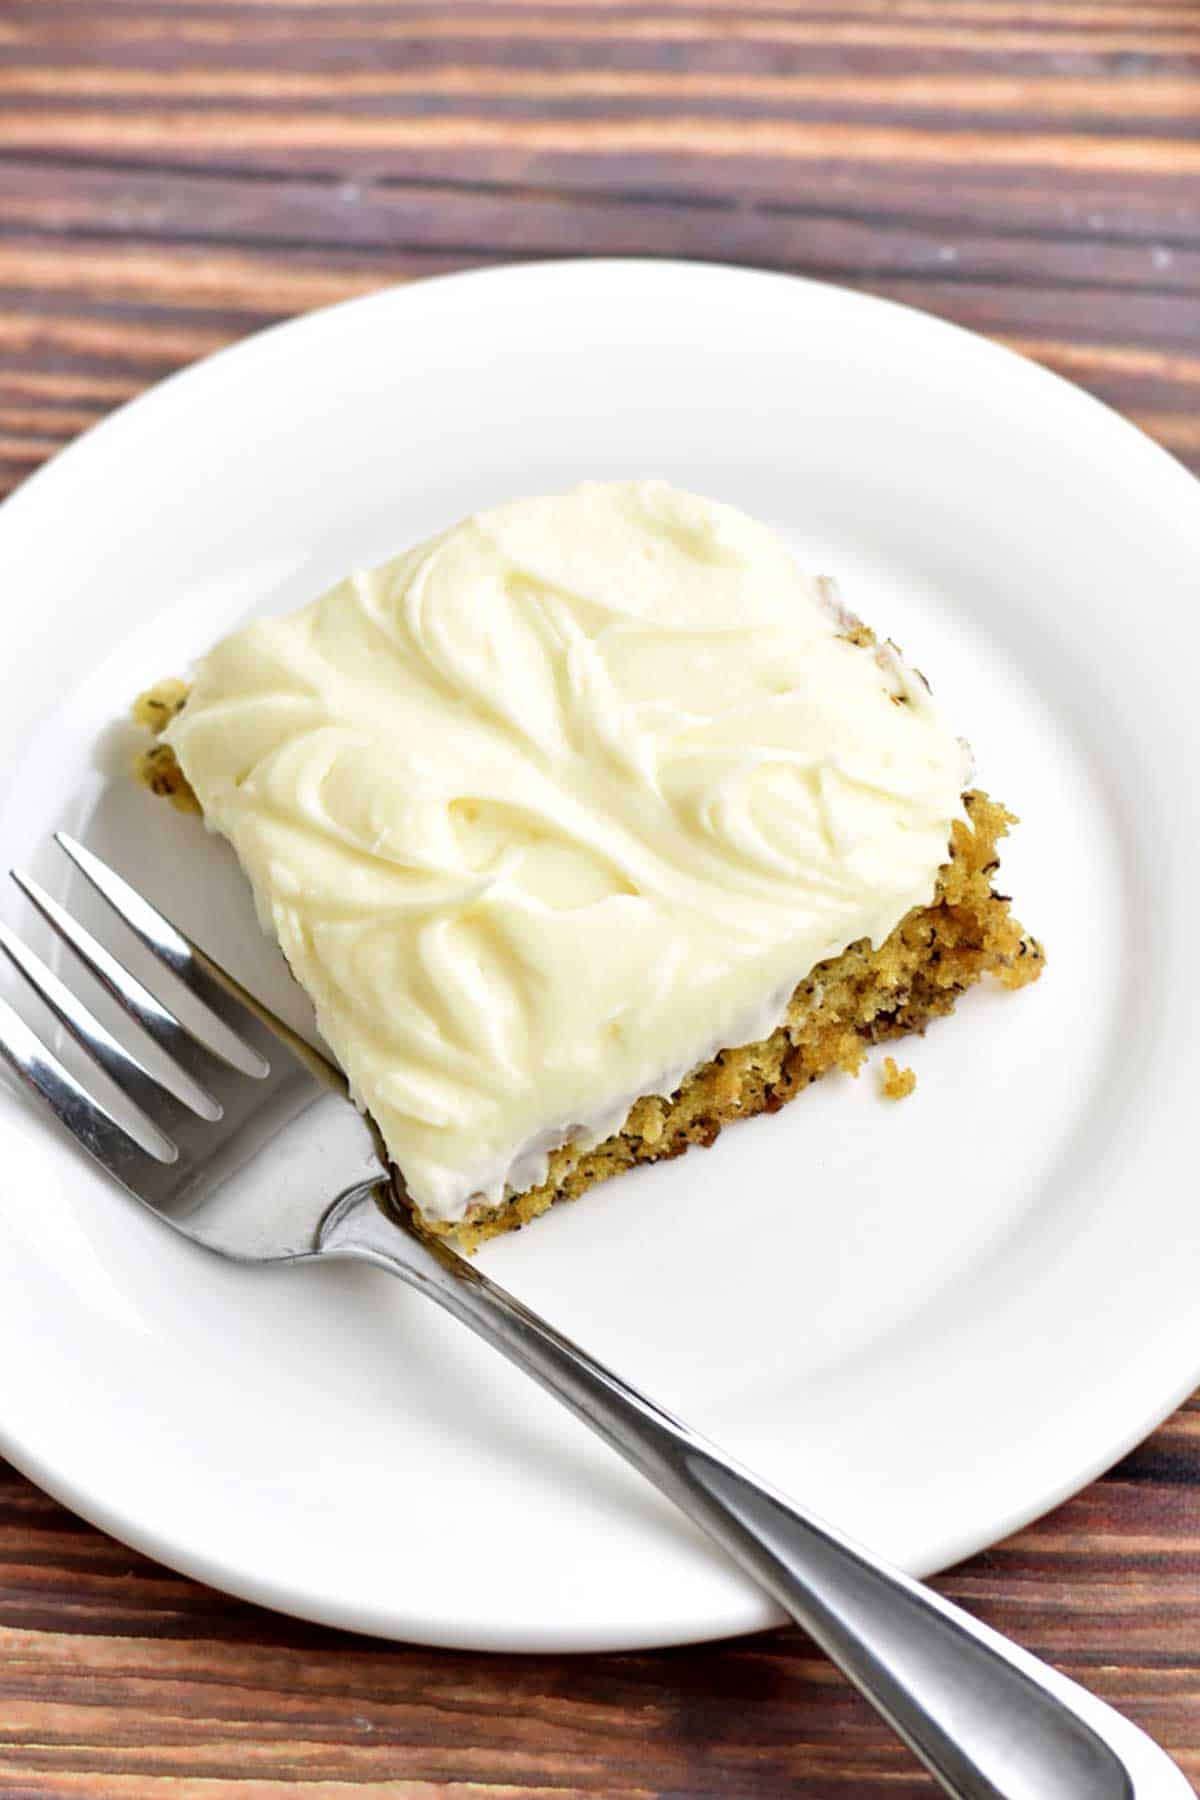 A slice of gluten free banana cake and a fork on a round white dessert plate.